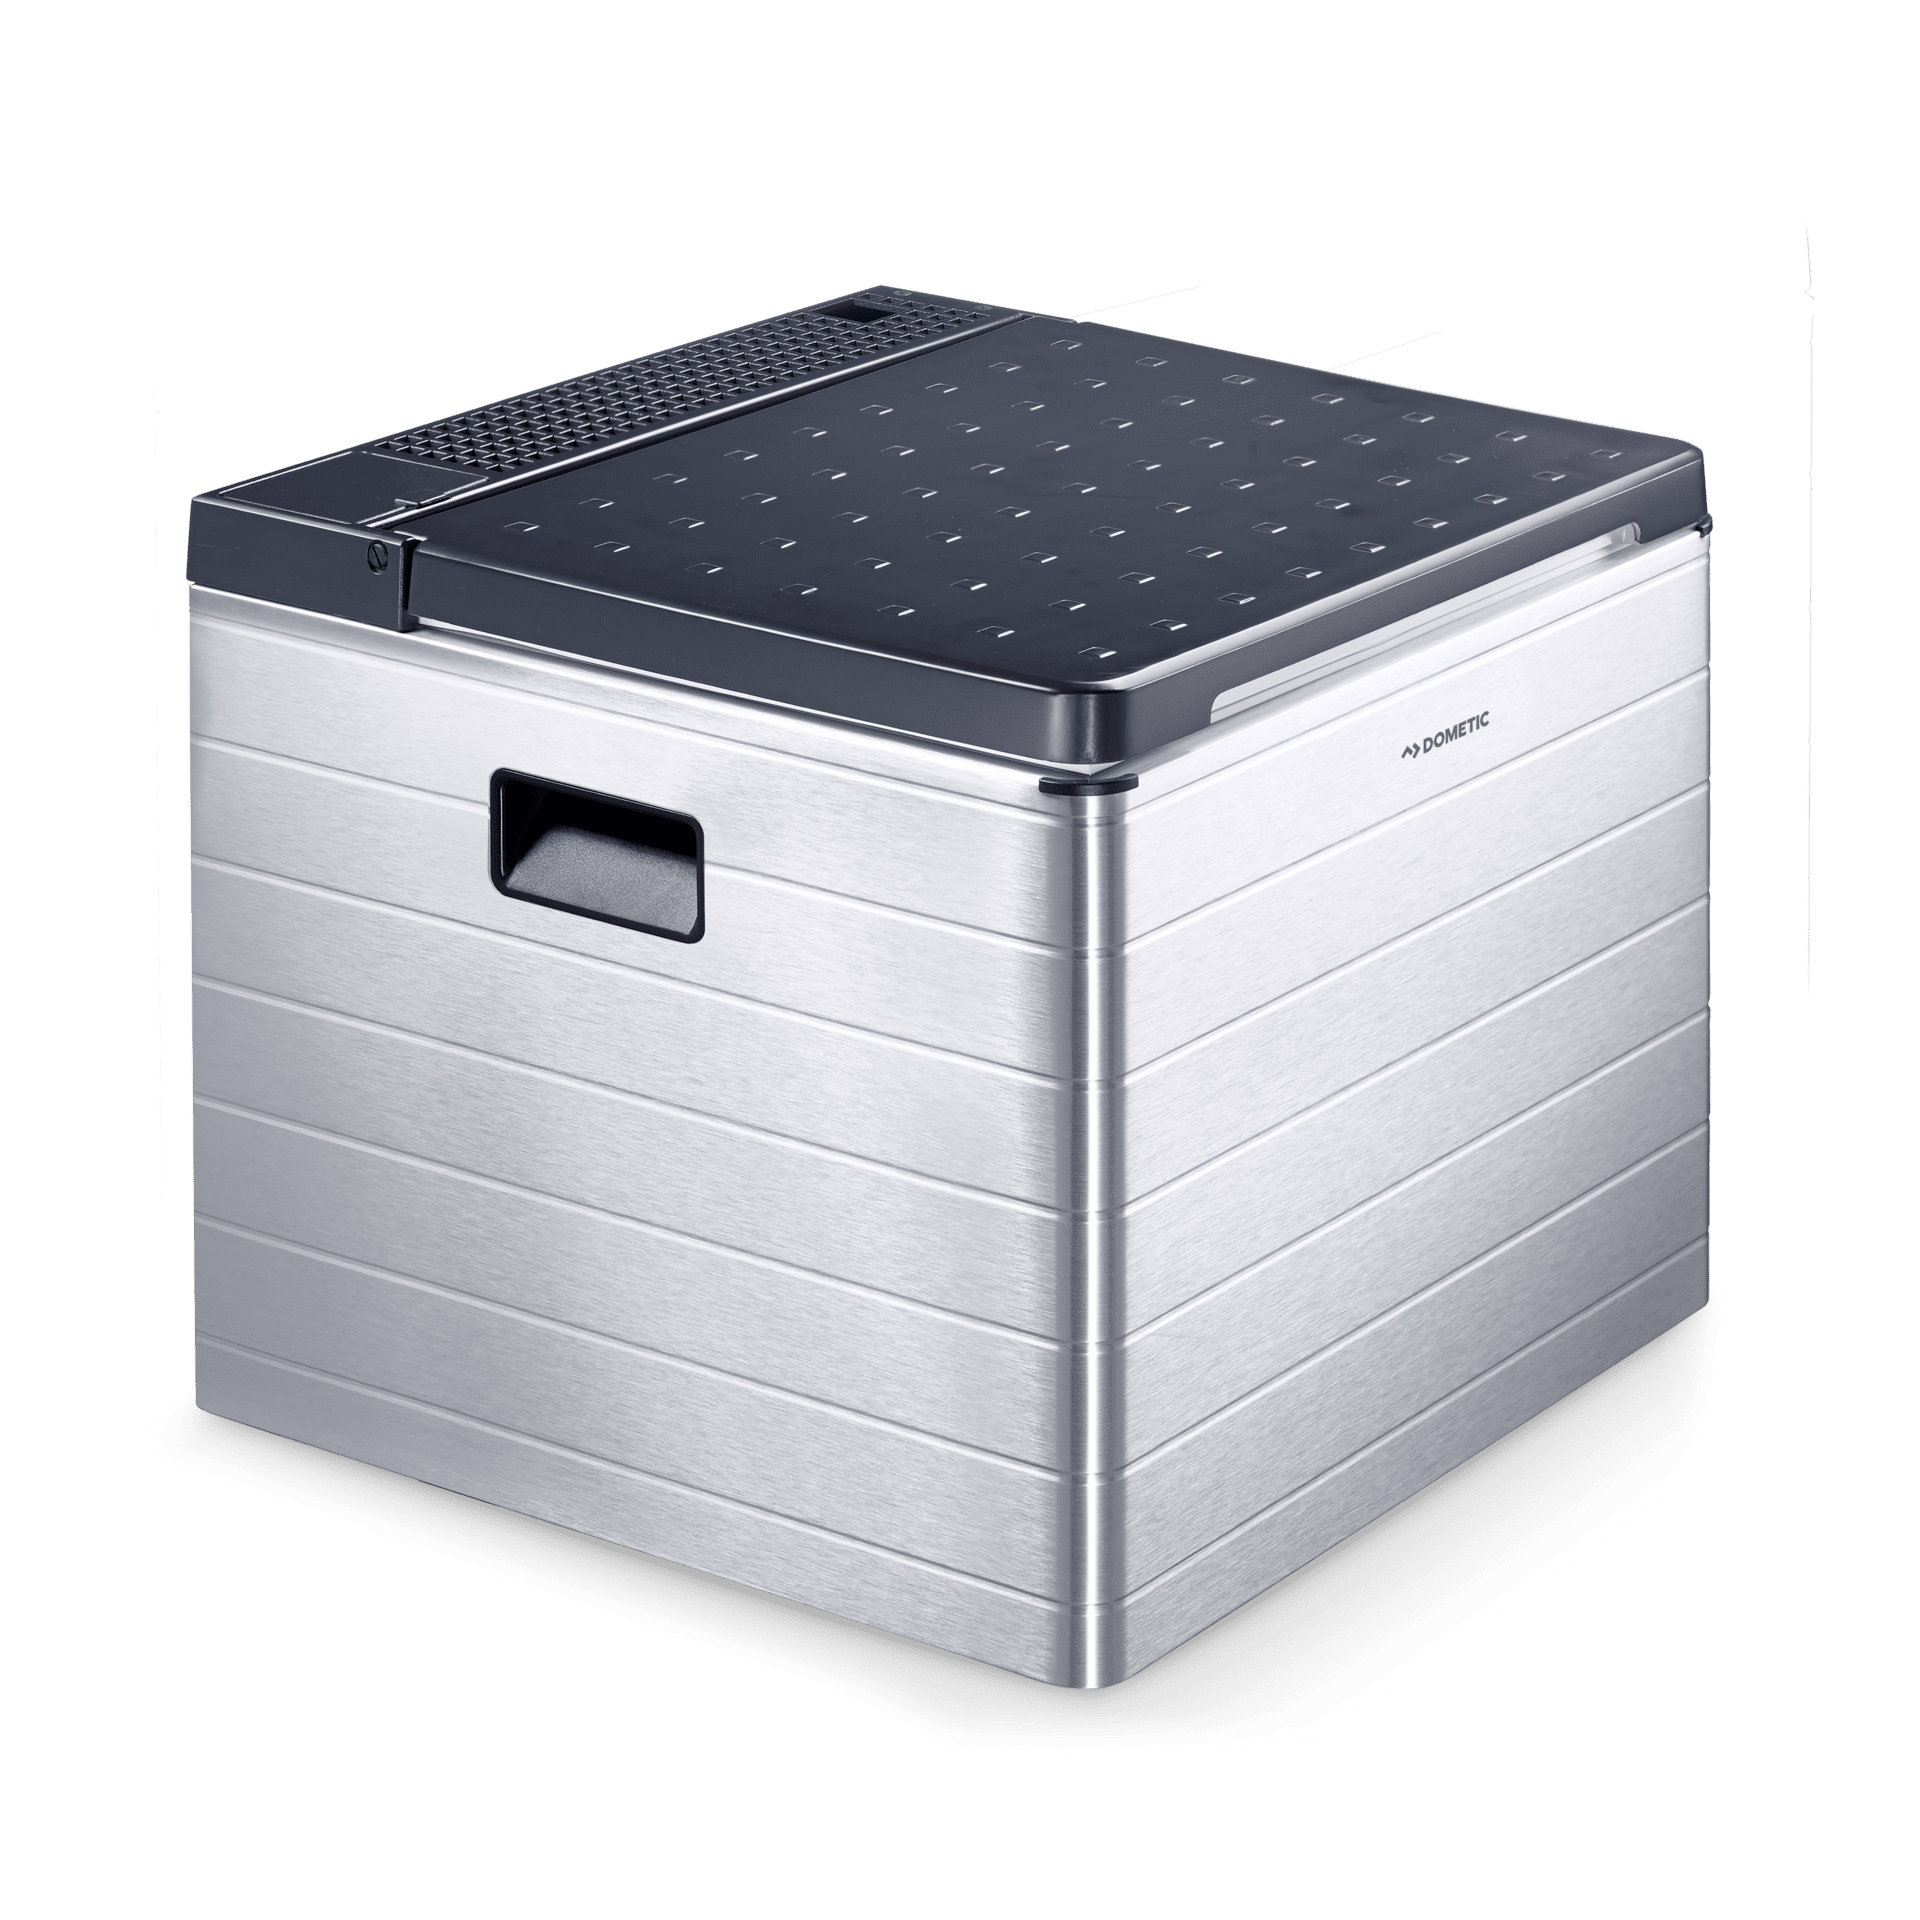 criticus Onvoorziene omstandigheden andere Dometic CombiCool ACX 40 - Portable absorption cooler, 40 l, 30 mbar |  Dometic.com